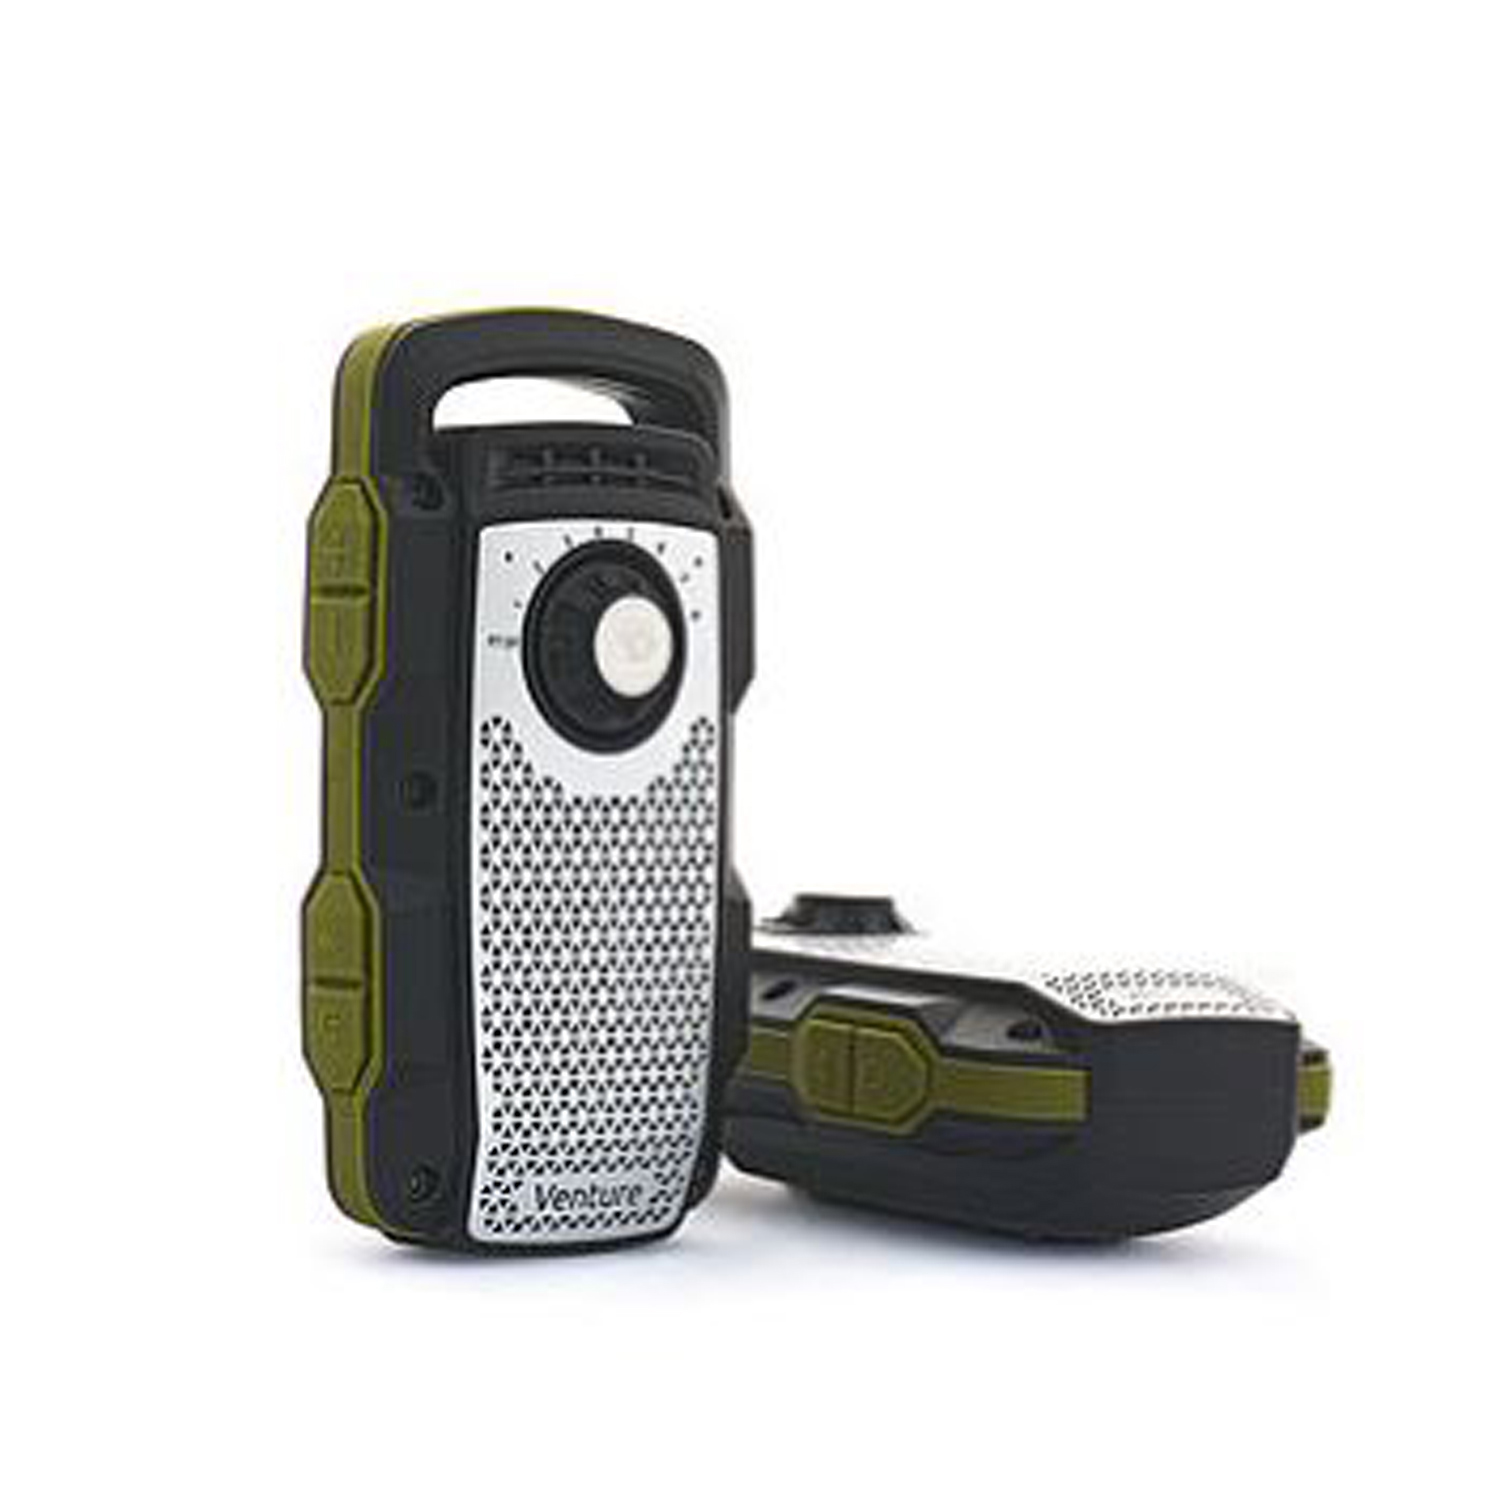 Dreamwave Venture  all-in-one Outdoor Portable Bluetooth speaker and walkie-talkie two way radio(Single Unit)